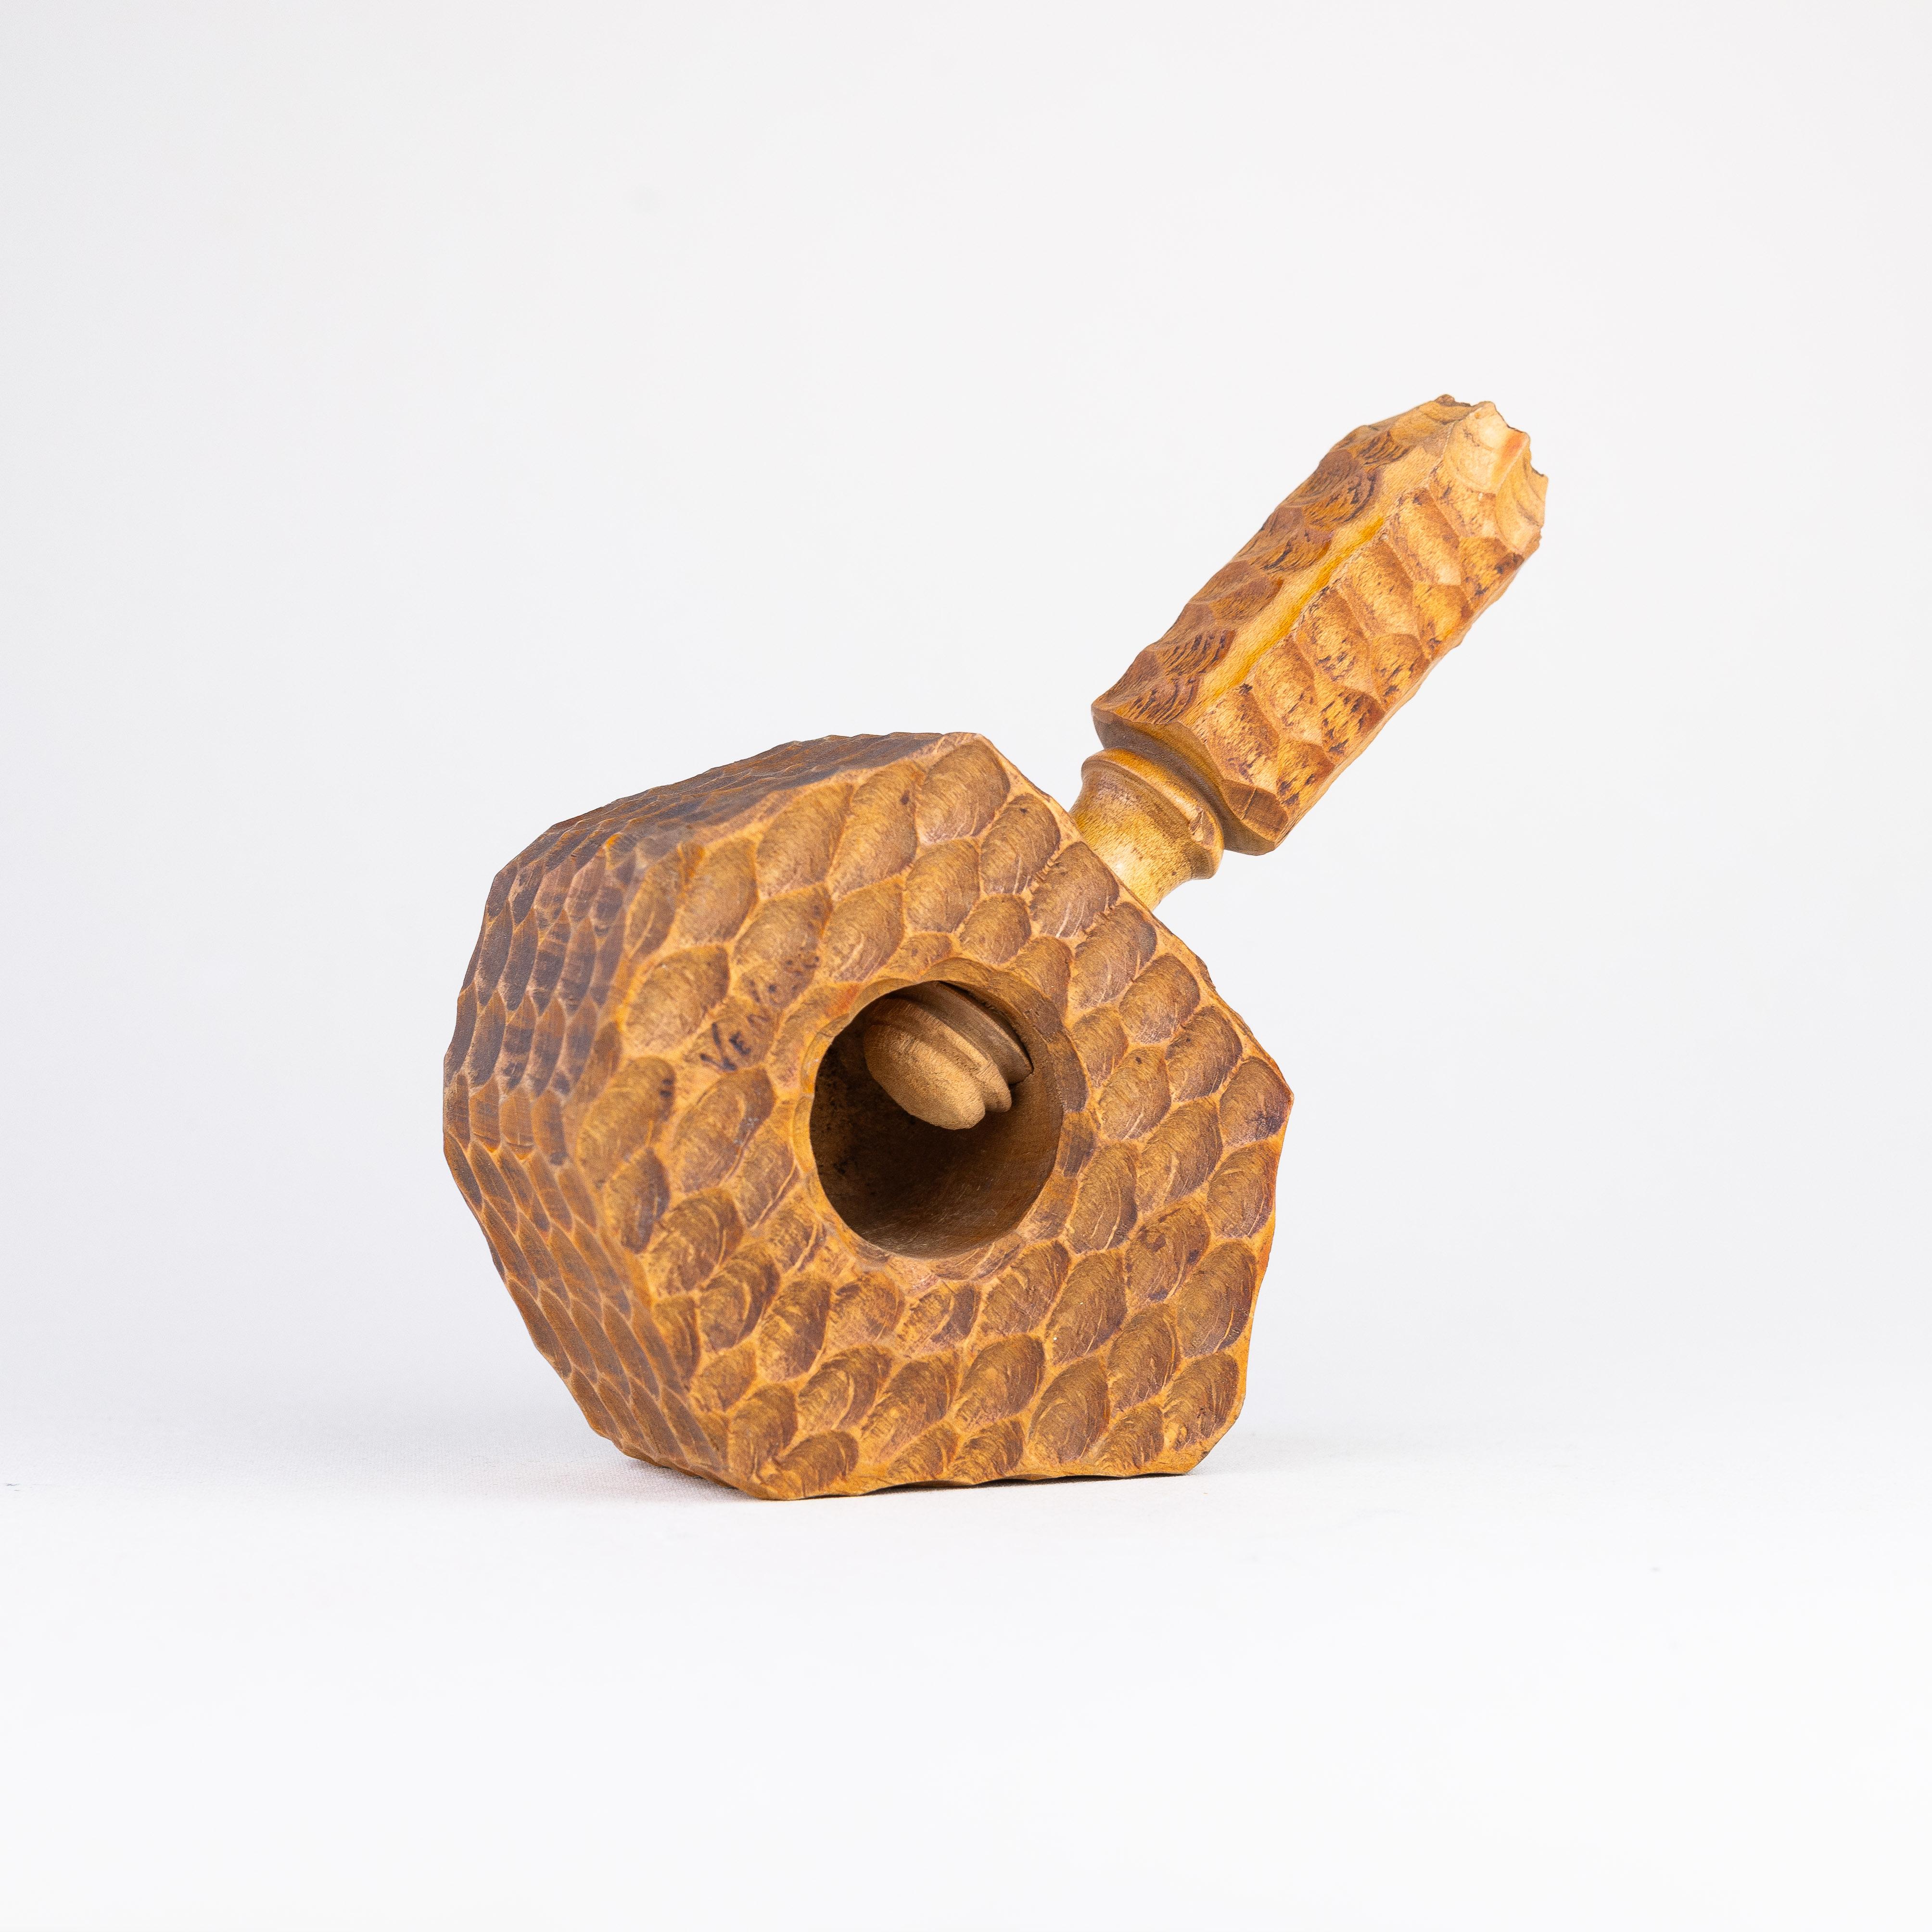 Sculptural wooden nutcracker.

Folk Art piece from the French Alps. Dating the 1960s.

The surface of the wood is carved with a gouge, giving it this raw patterned appearance.

Engraved 